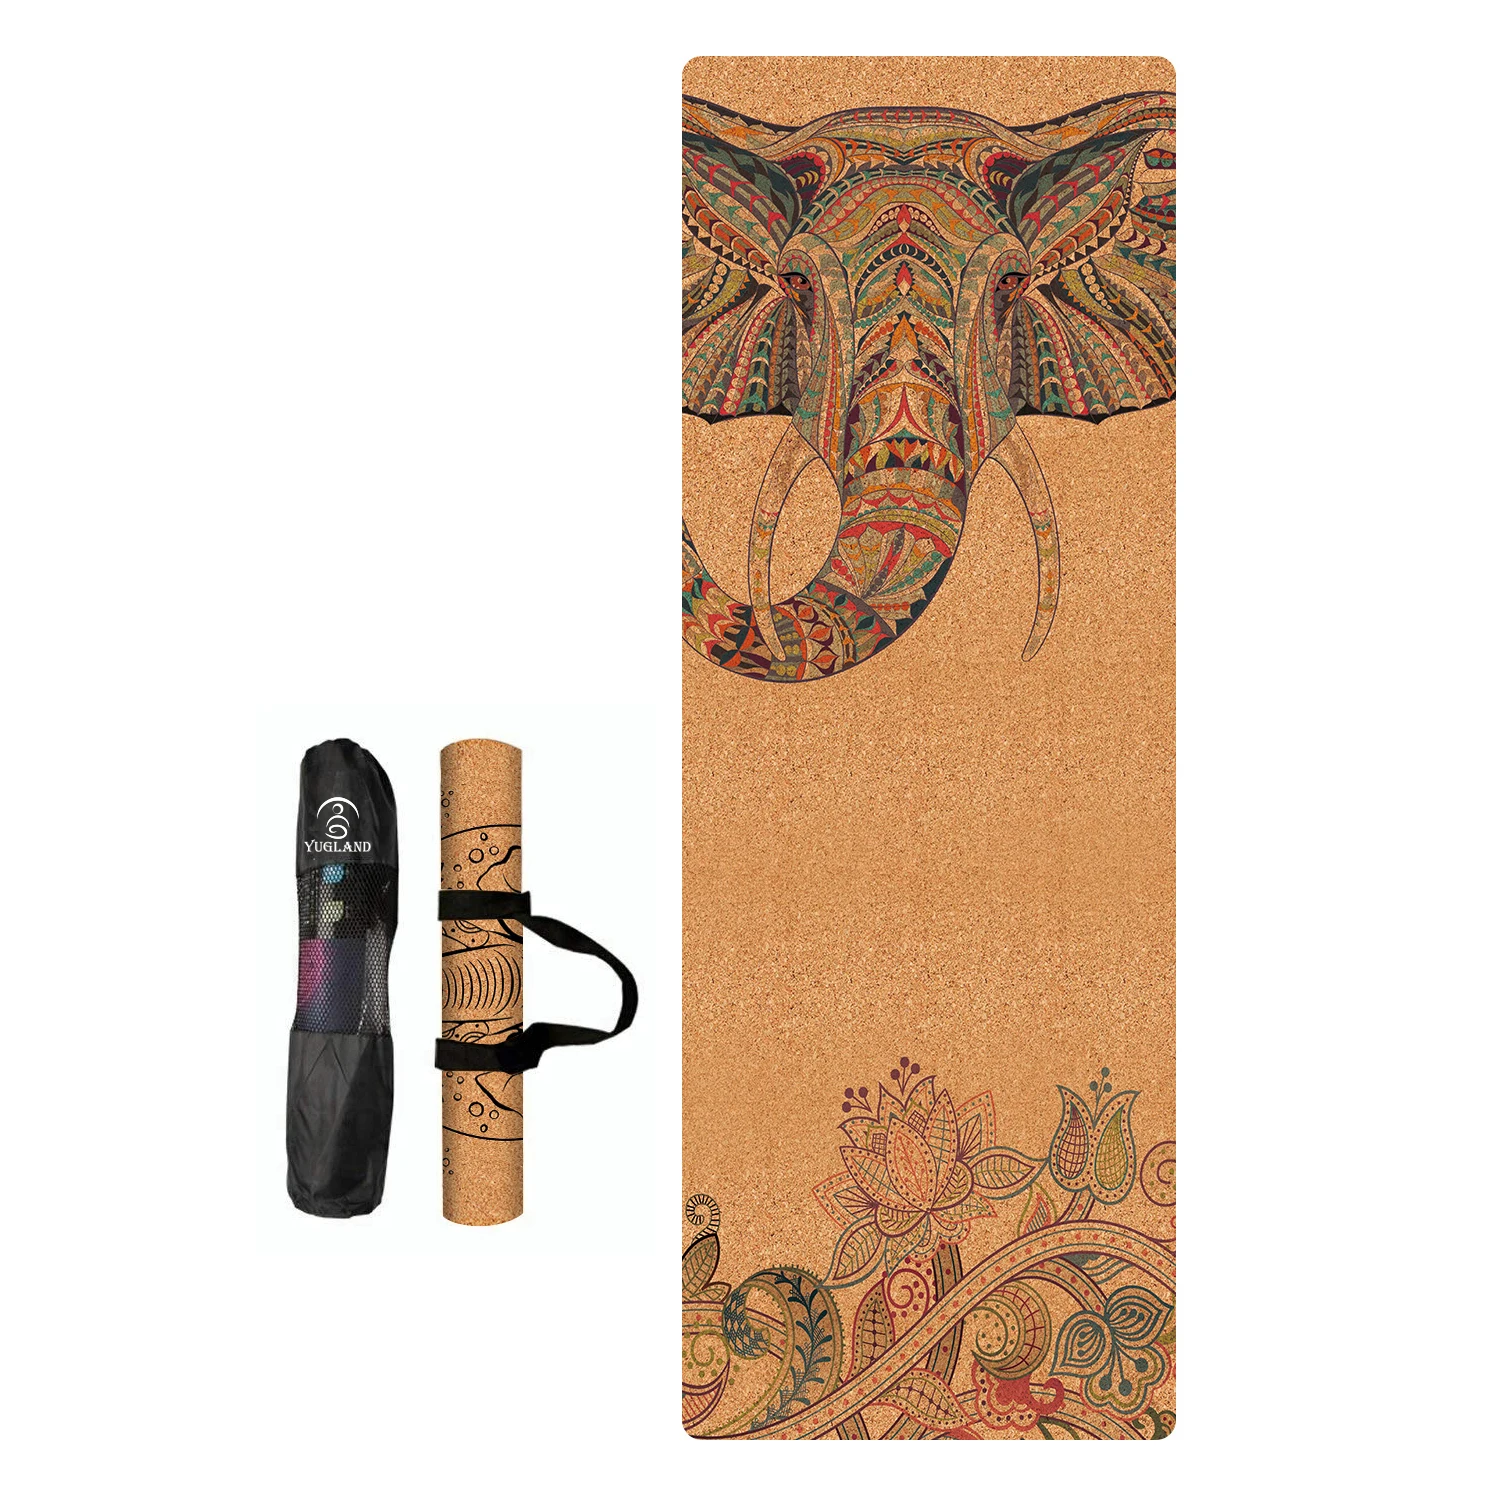 

Good Moisture-Proof Effect Eco-Friendly Pure Wood Made Of Natural Rubber Cork Yoga Mat